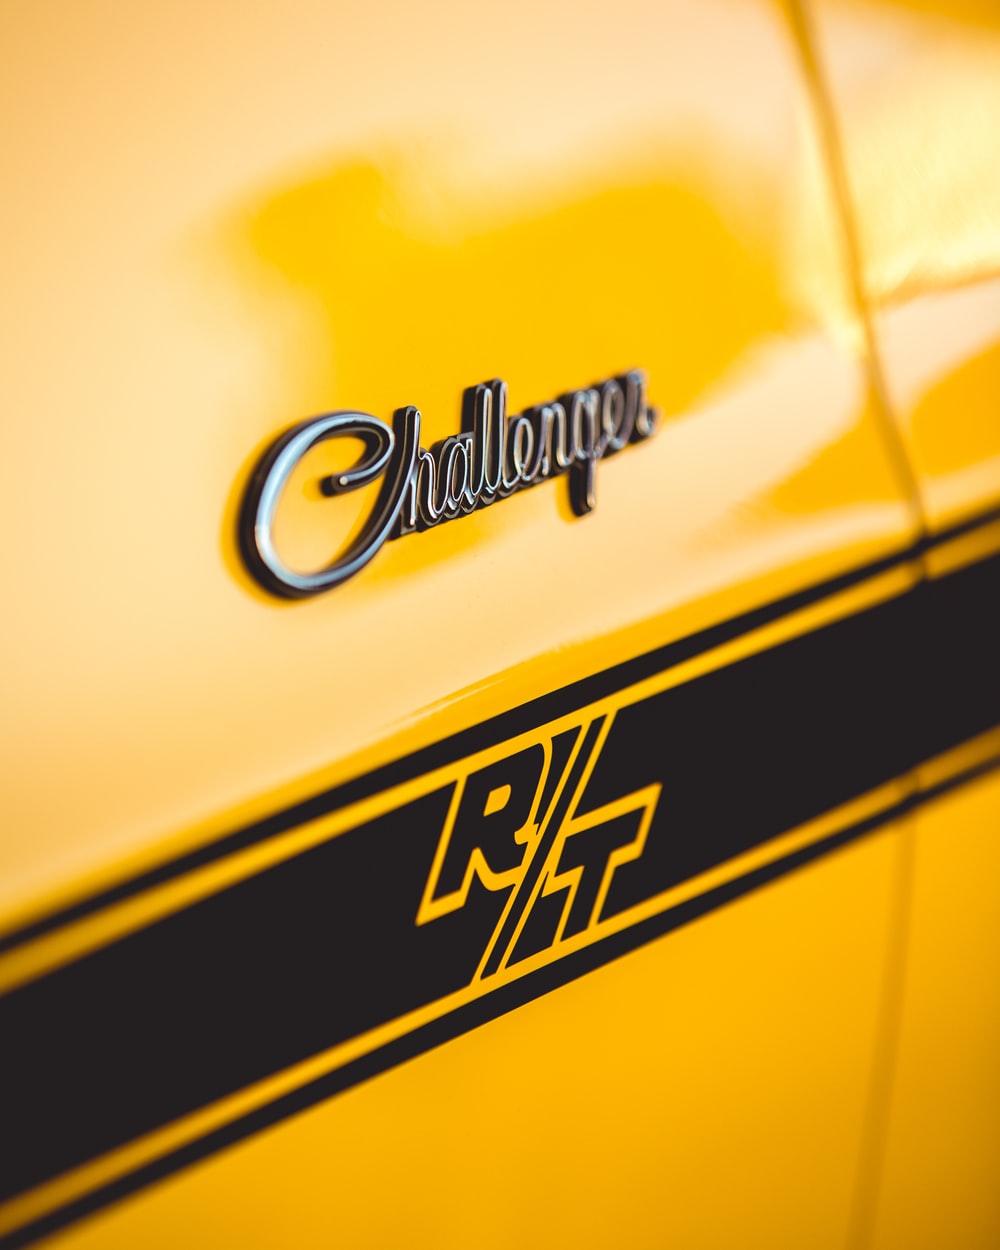 Yellow Dodge Challenger Photo Puter Background Image On